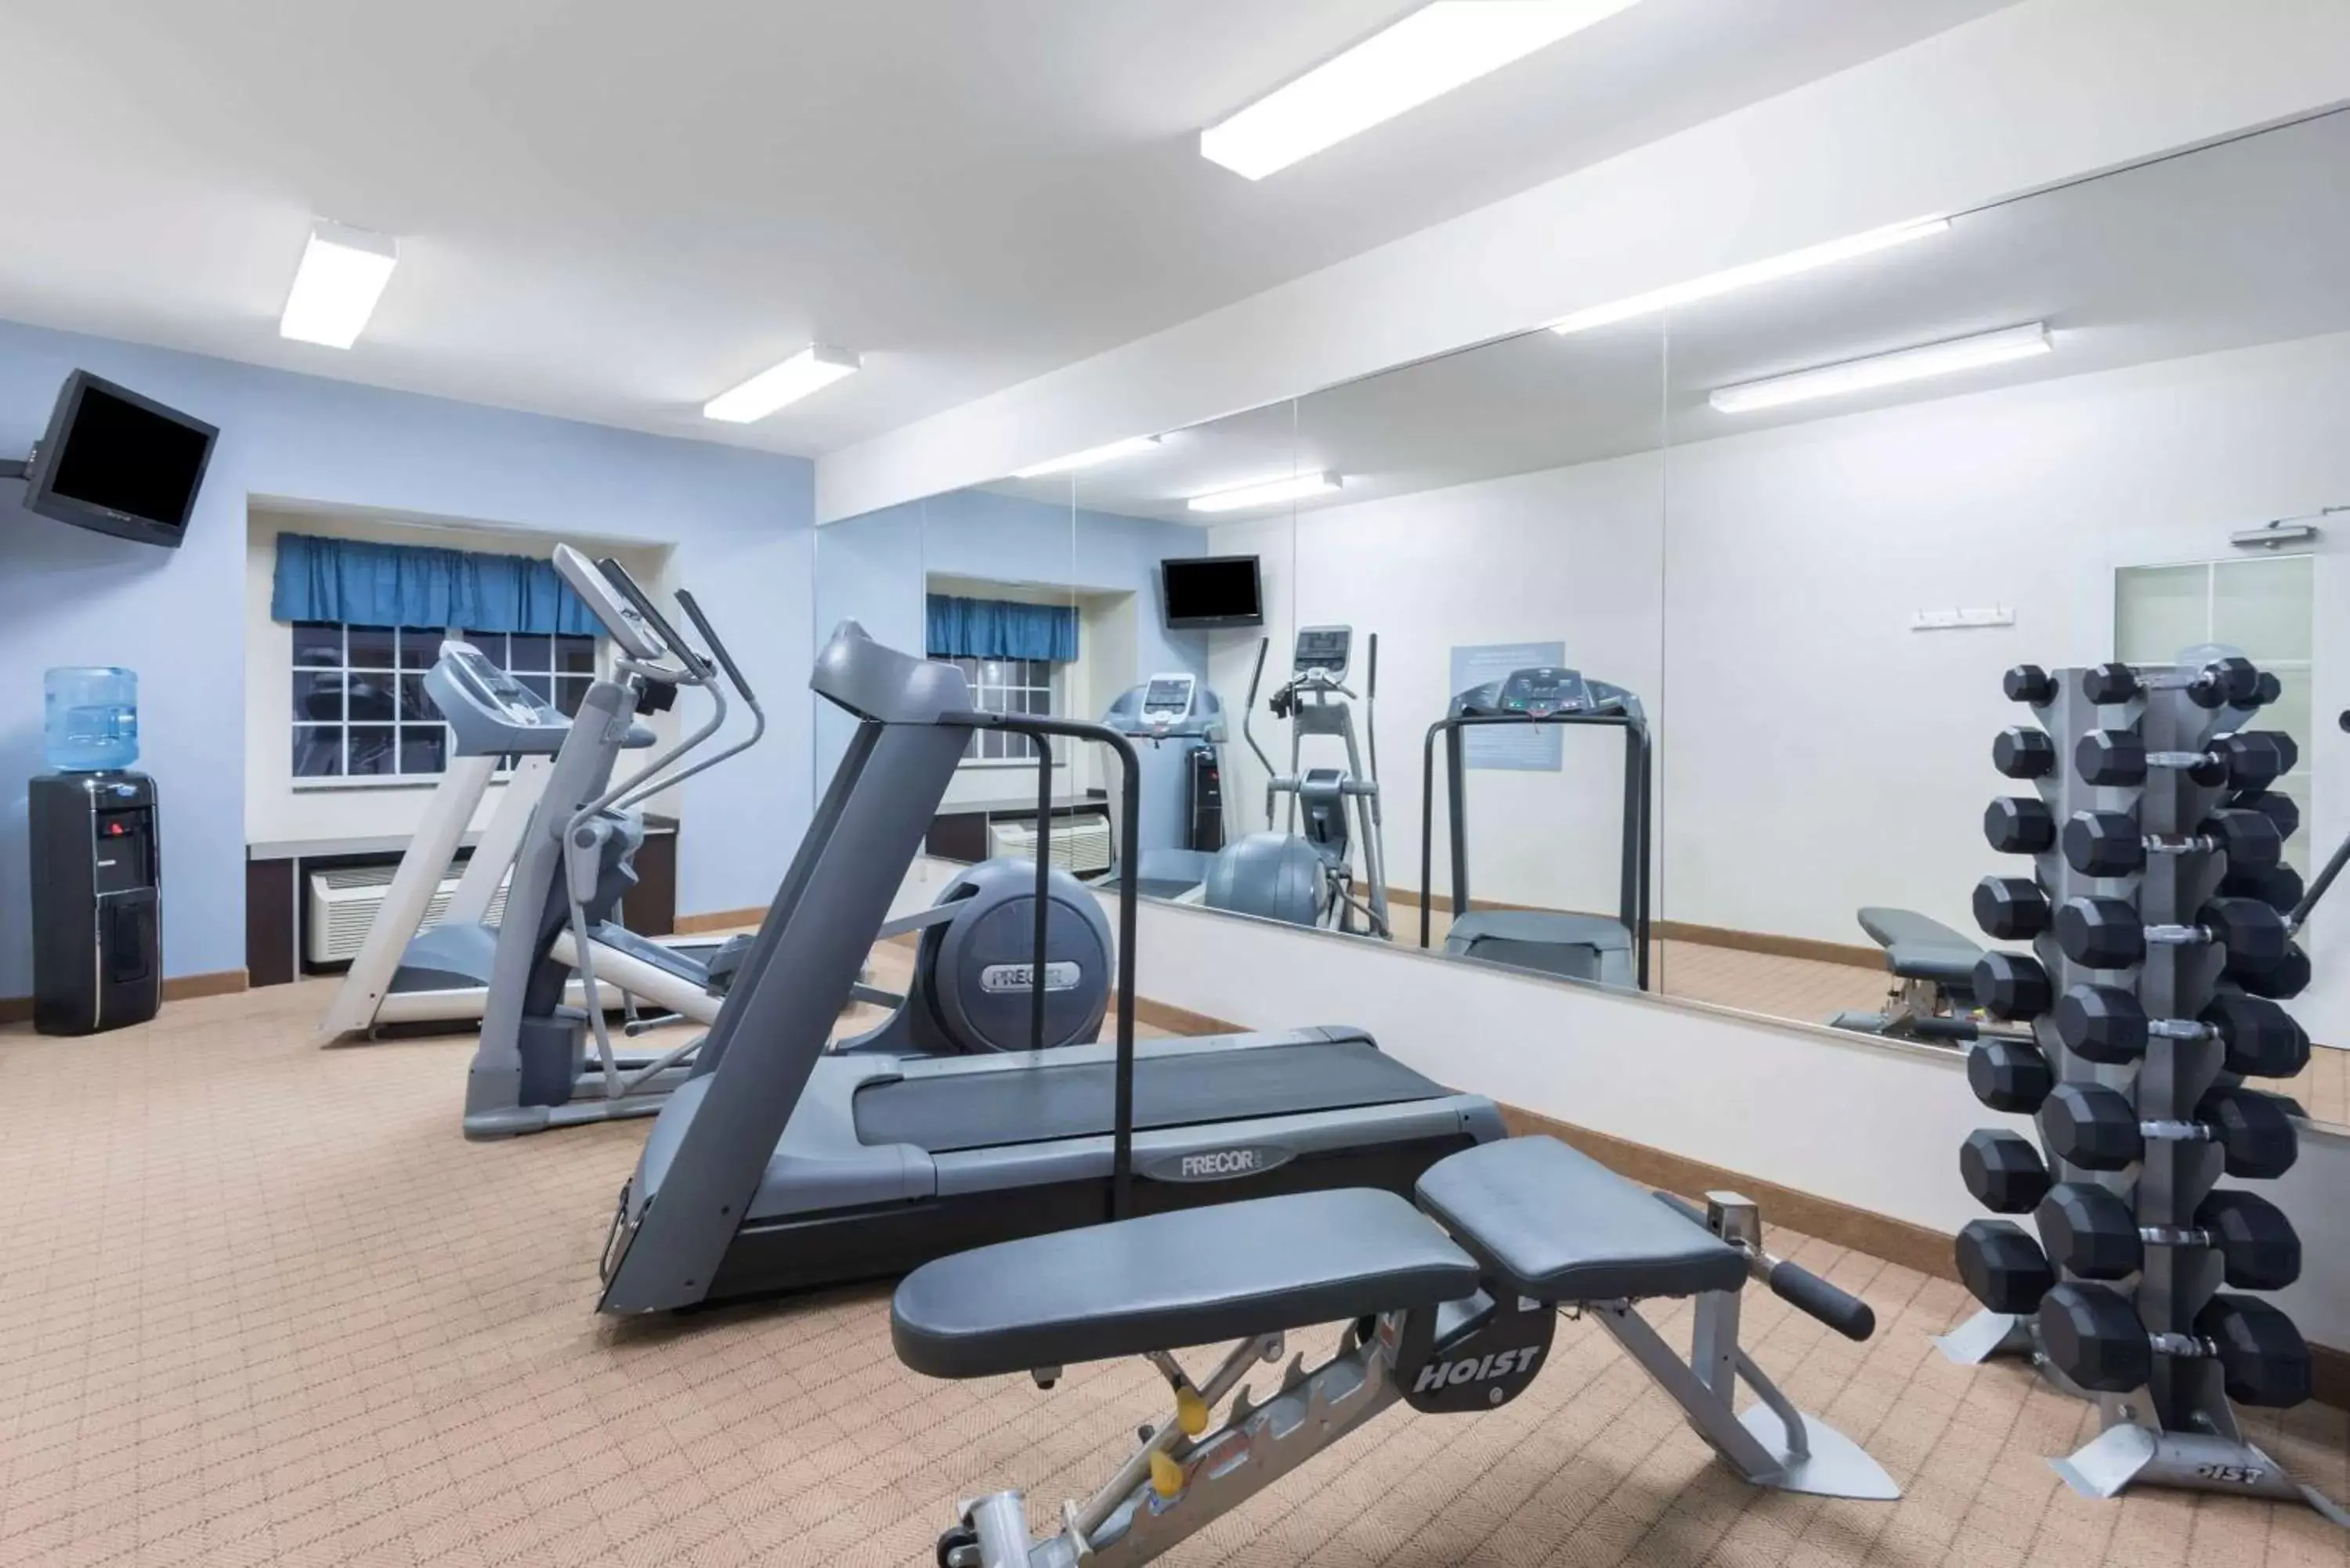 Fitness centre/facilities, Fitness Center/Facilities in Microtel Inn and Suites Baton Rouge Airport